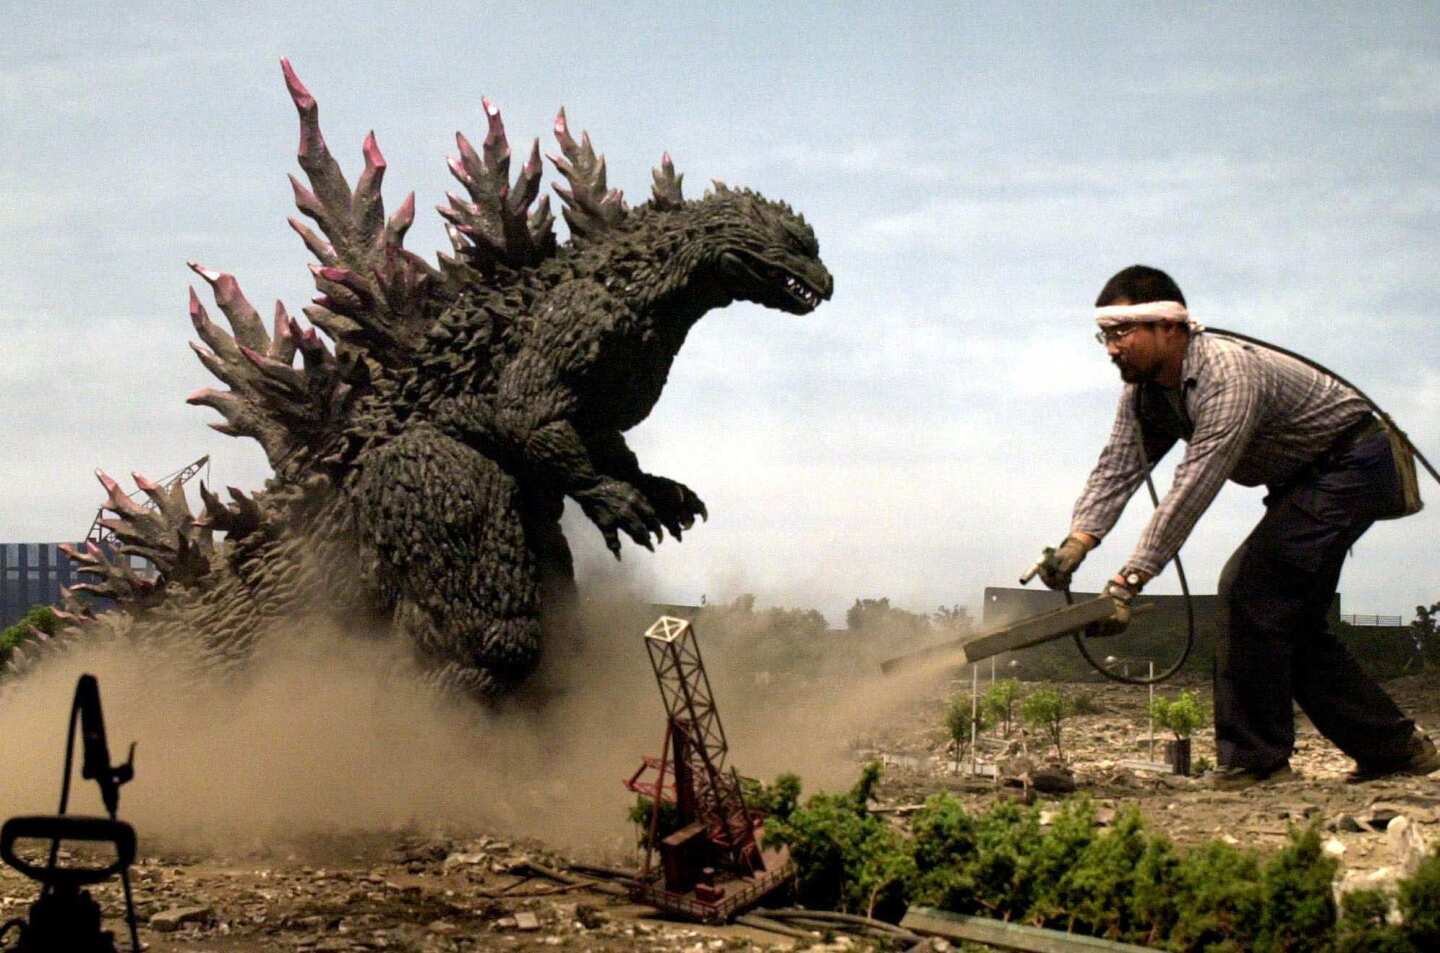 The legendary movie monster Godzilla creates a dust storm during the production of the Toho production company's 24th Godzilla movie at its studio in Tokyo on Aug. 3, 2000. During the production of "Godzilla vs. Megaguirus," 1,500 of the monster's fans applied to a week-long "see Godzilla filming" tour organized by Toho and a travel agency.